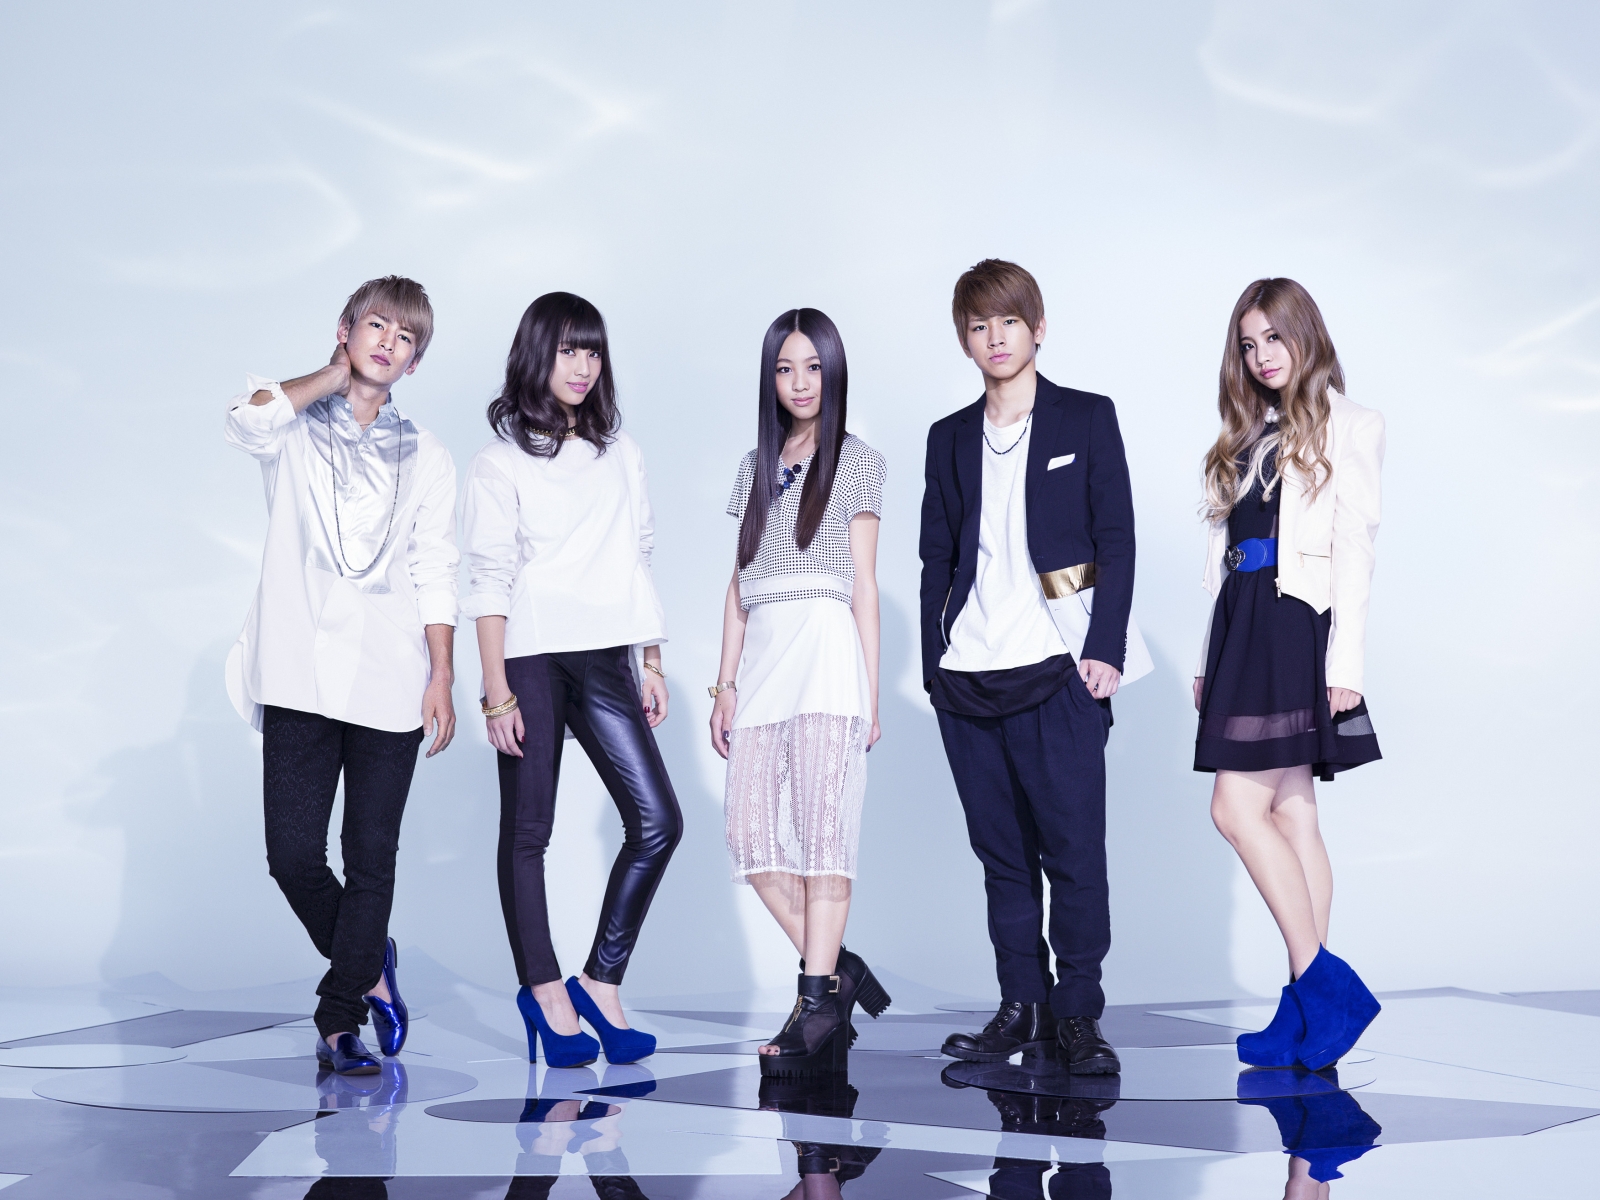 Sounds like AAA﻿? Avex’s New Boys & Girls group of 5 “lol” makes their Debut!!